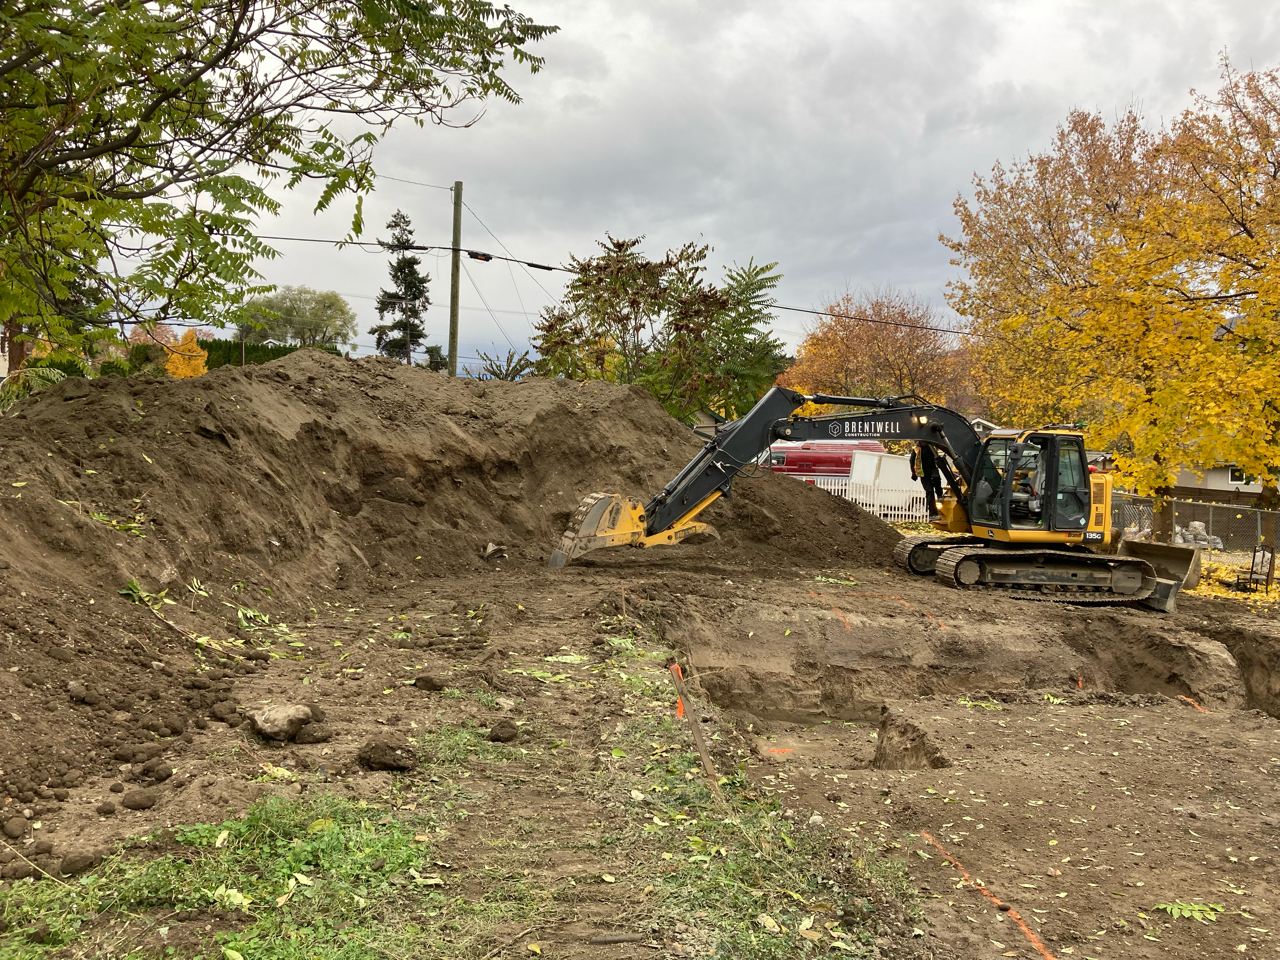 A yellow and black excavator digging in the fall